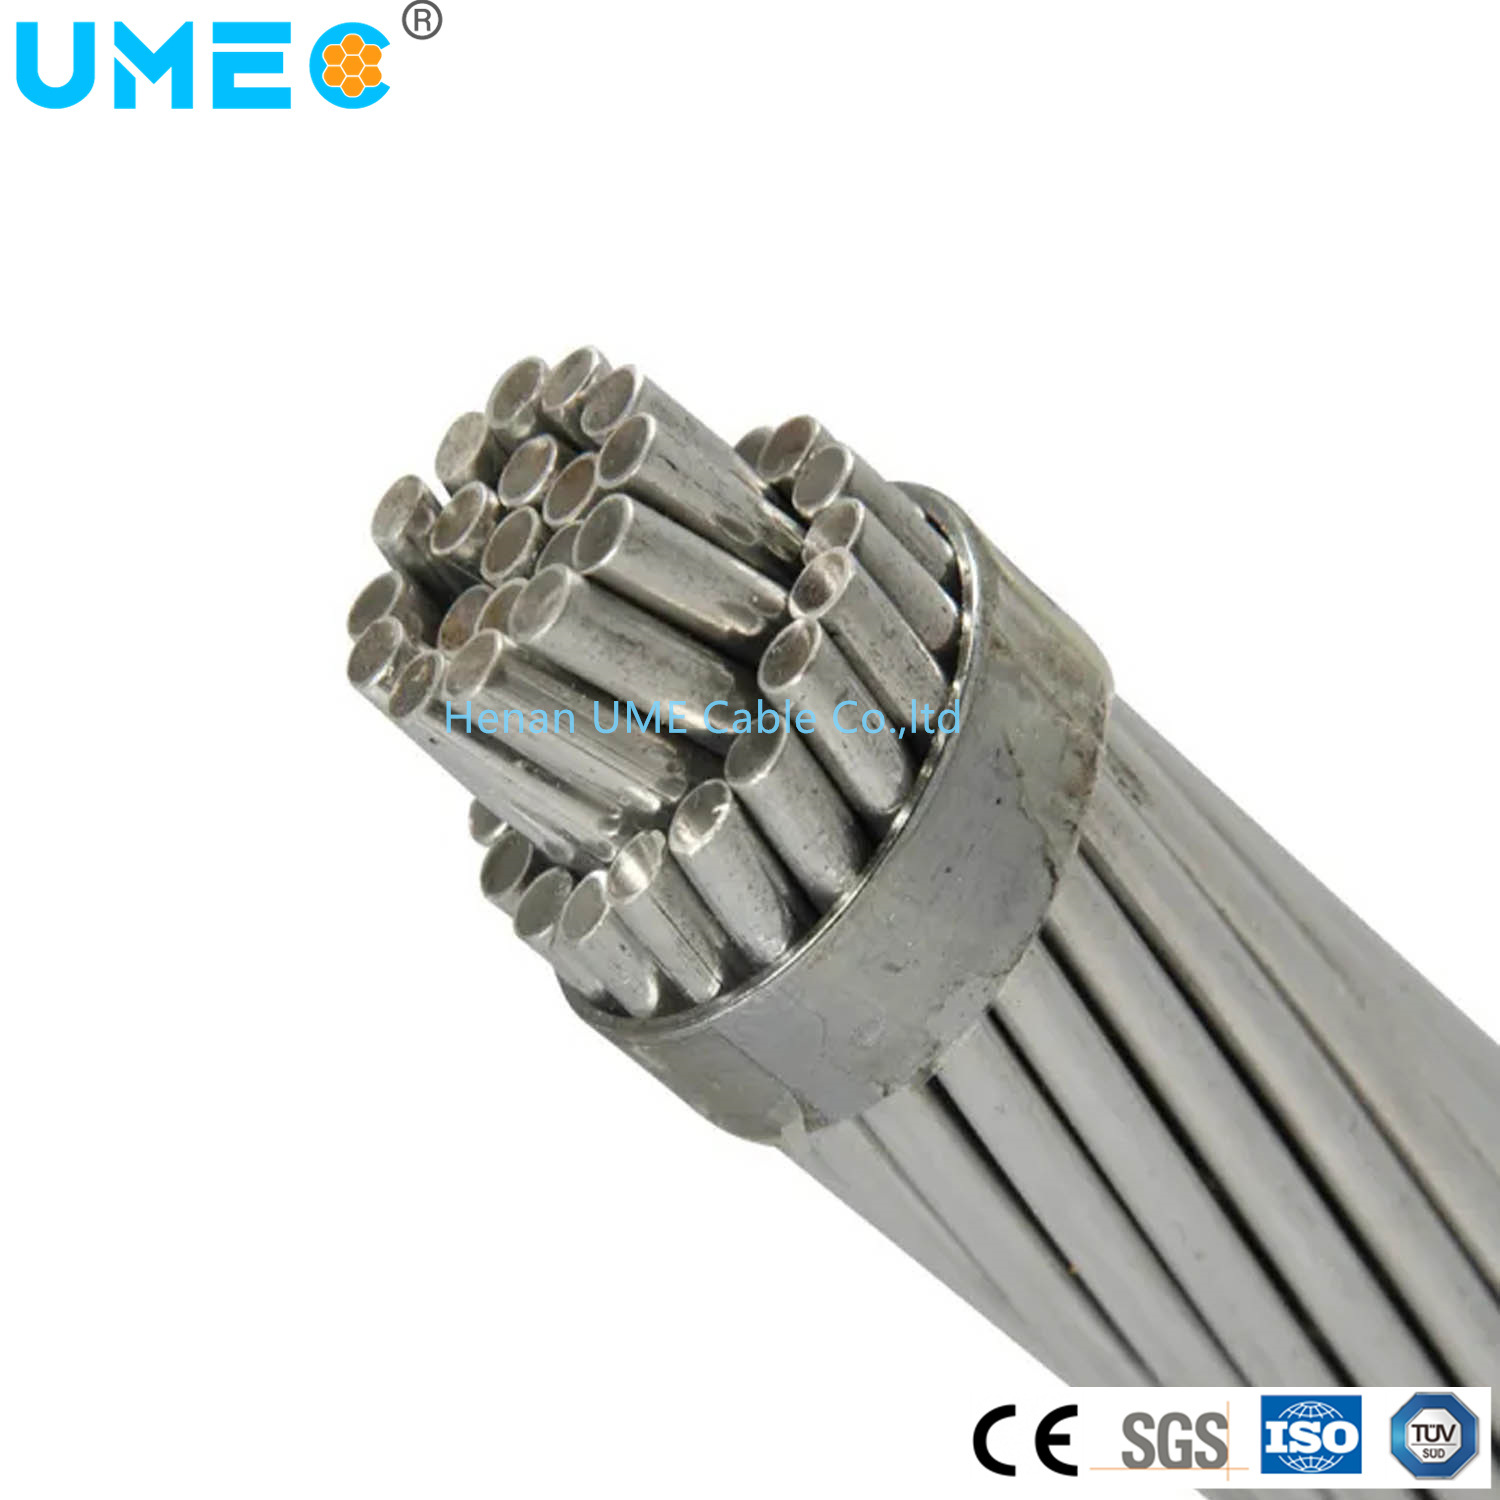 Overhead Ground Wire Aluminum Coated Steel Wire Alumoweld All as Strand 3.5mm Acs